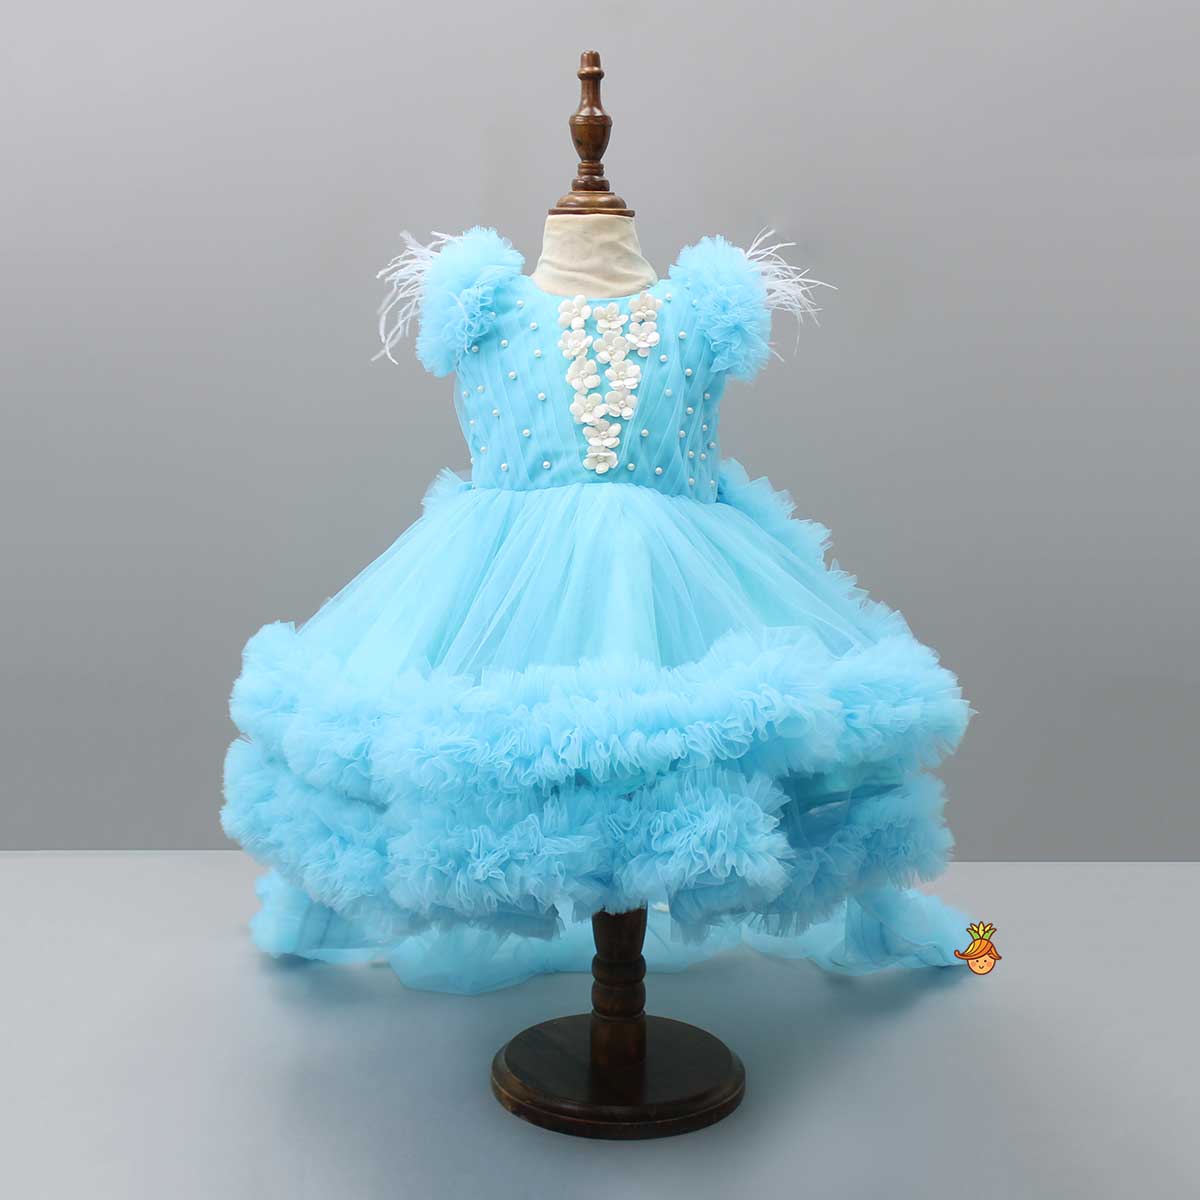 Pre Order: Pleated Yoke Blue Dress With Detachable Trail And Matching Headband